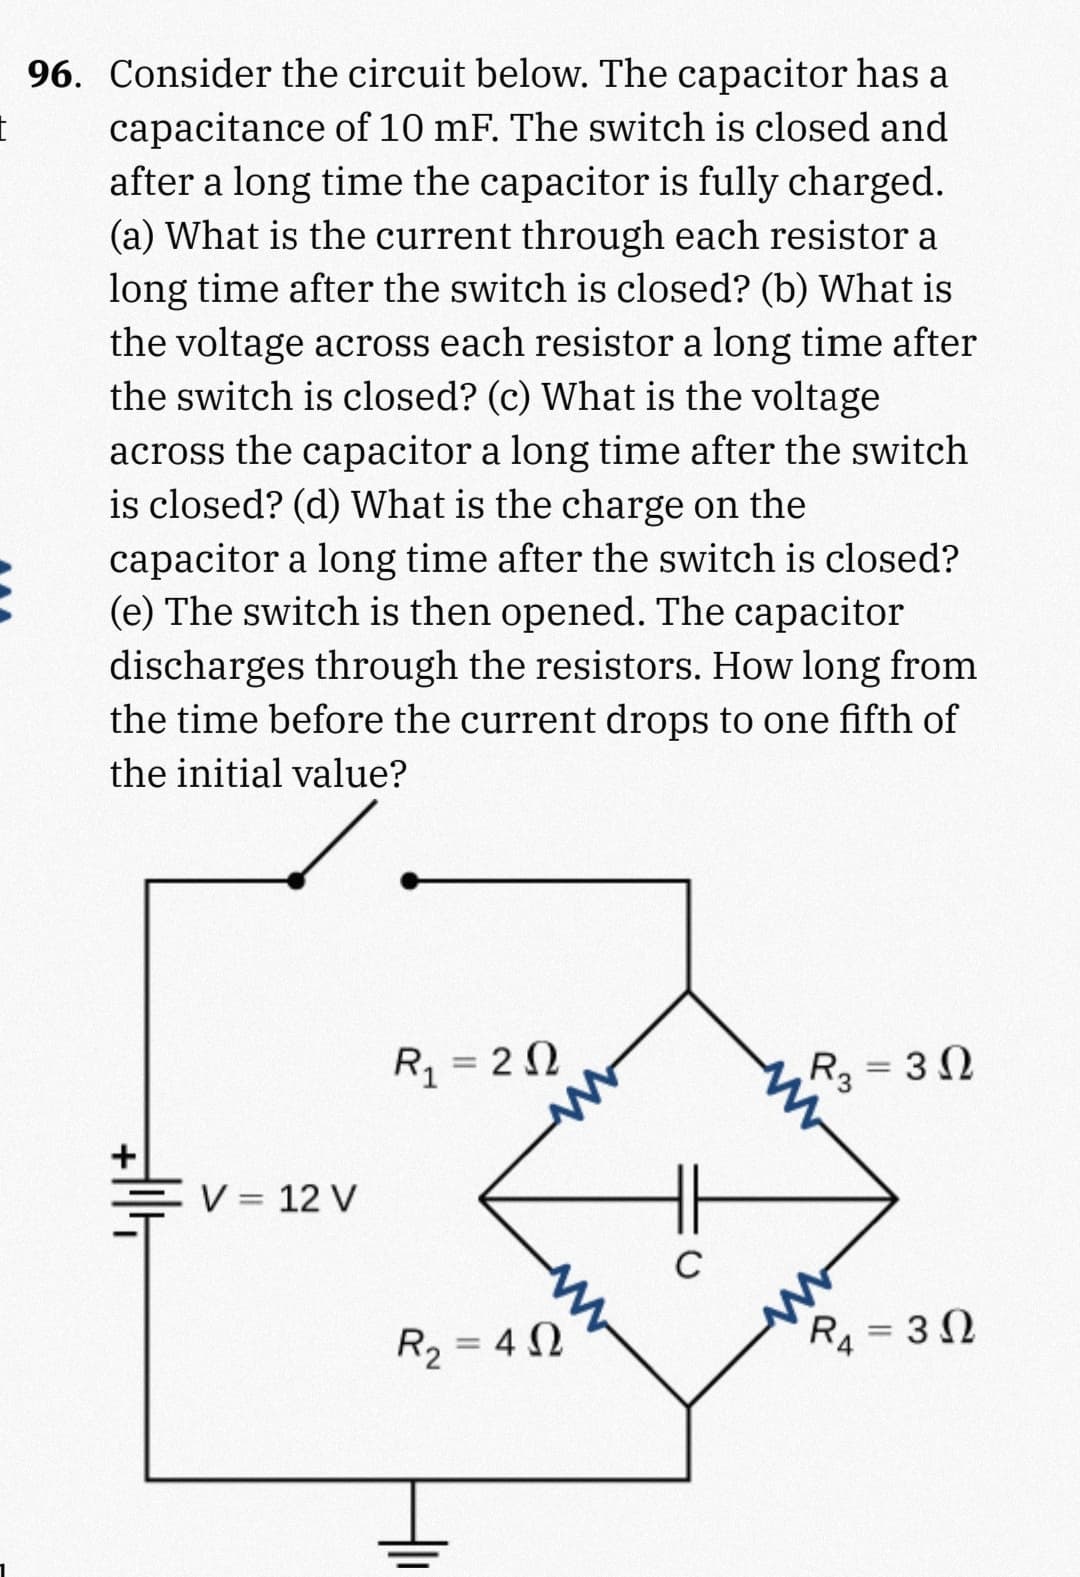 I
96. Consider the circuit below. The capacitor has a
capacitance of 10 mF. The switch is closed and
after a long time the capacitor is fully charged.
(a) What is the current through each resistor a
long time after the switch is closed? (b) What is
the voltage across each resistor a long time after
the switch is closed? (c) What is the voltage
across the capacitor a long time after the switch
is closed? (d) What is the charge on the
capacitor a long time after the switch is closed?
(e) The switch is then opened. The capacitor
discharges through the resistors. How long from
the time before the current drops to one fifth of
the initial value?
V = 12 V
R₁ = 20
R₁₂ = 30
R₂ = 42
C
R₁₁ = 30